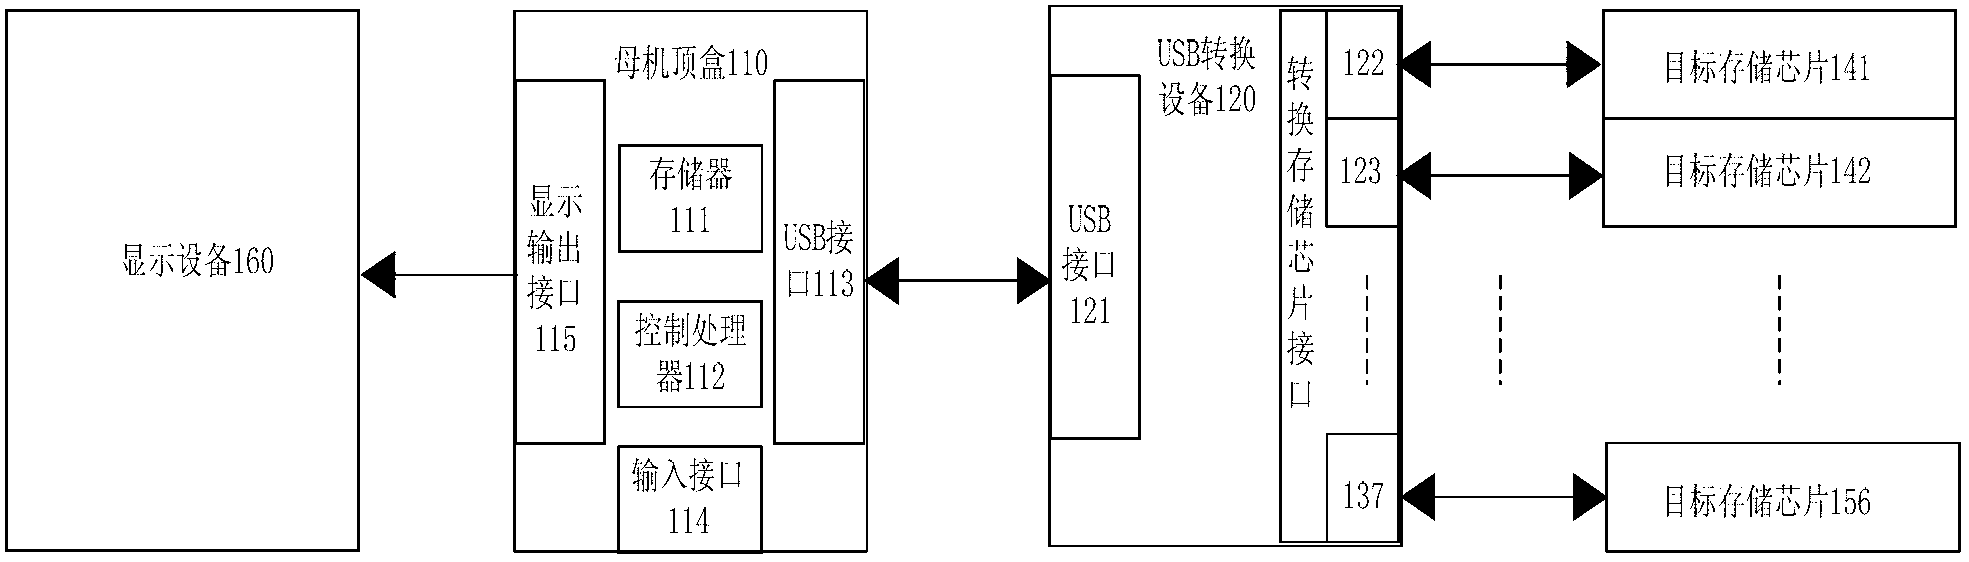 Method and device for burning set-top box storage chips